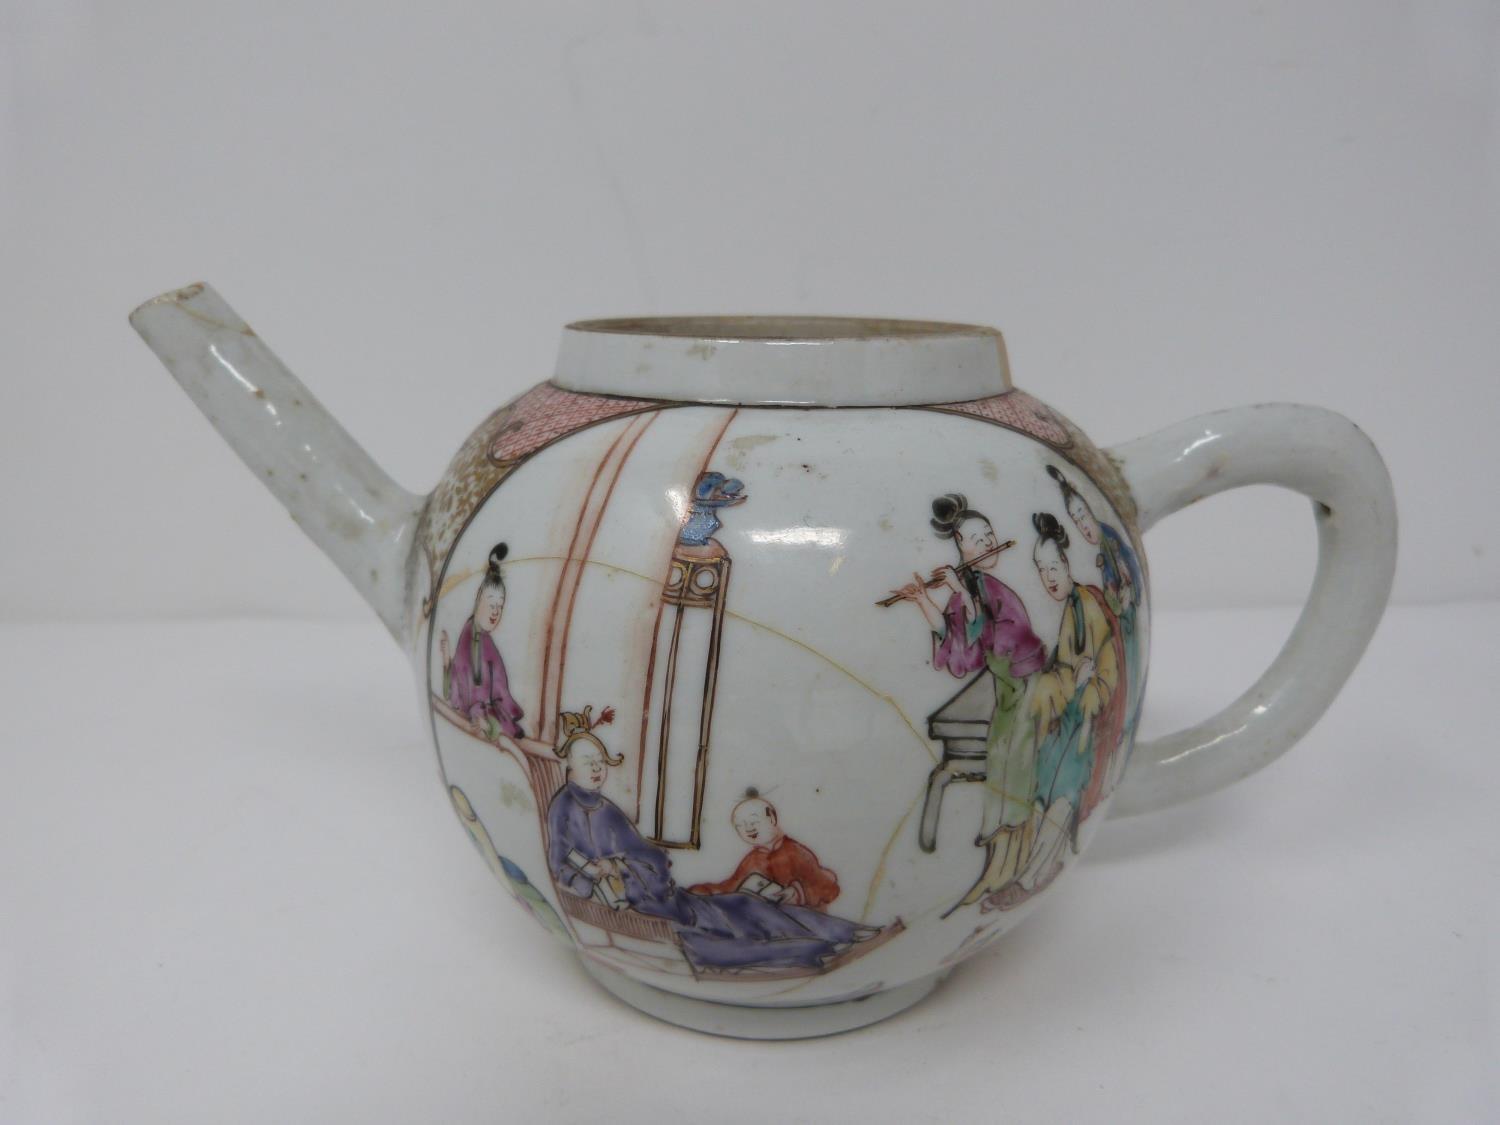 A late 18th century Chinese export wear porcelain teapot with painted figures and gilded floral - Image 3 of 12